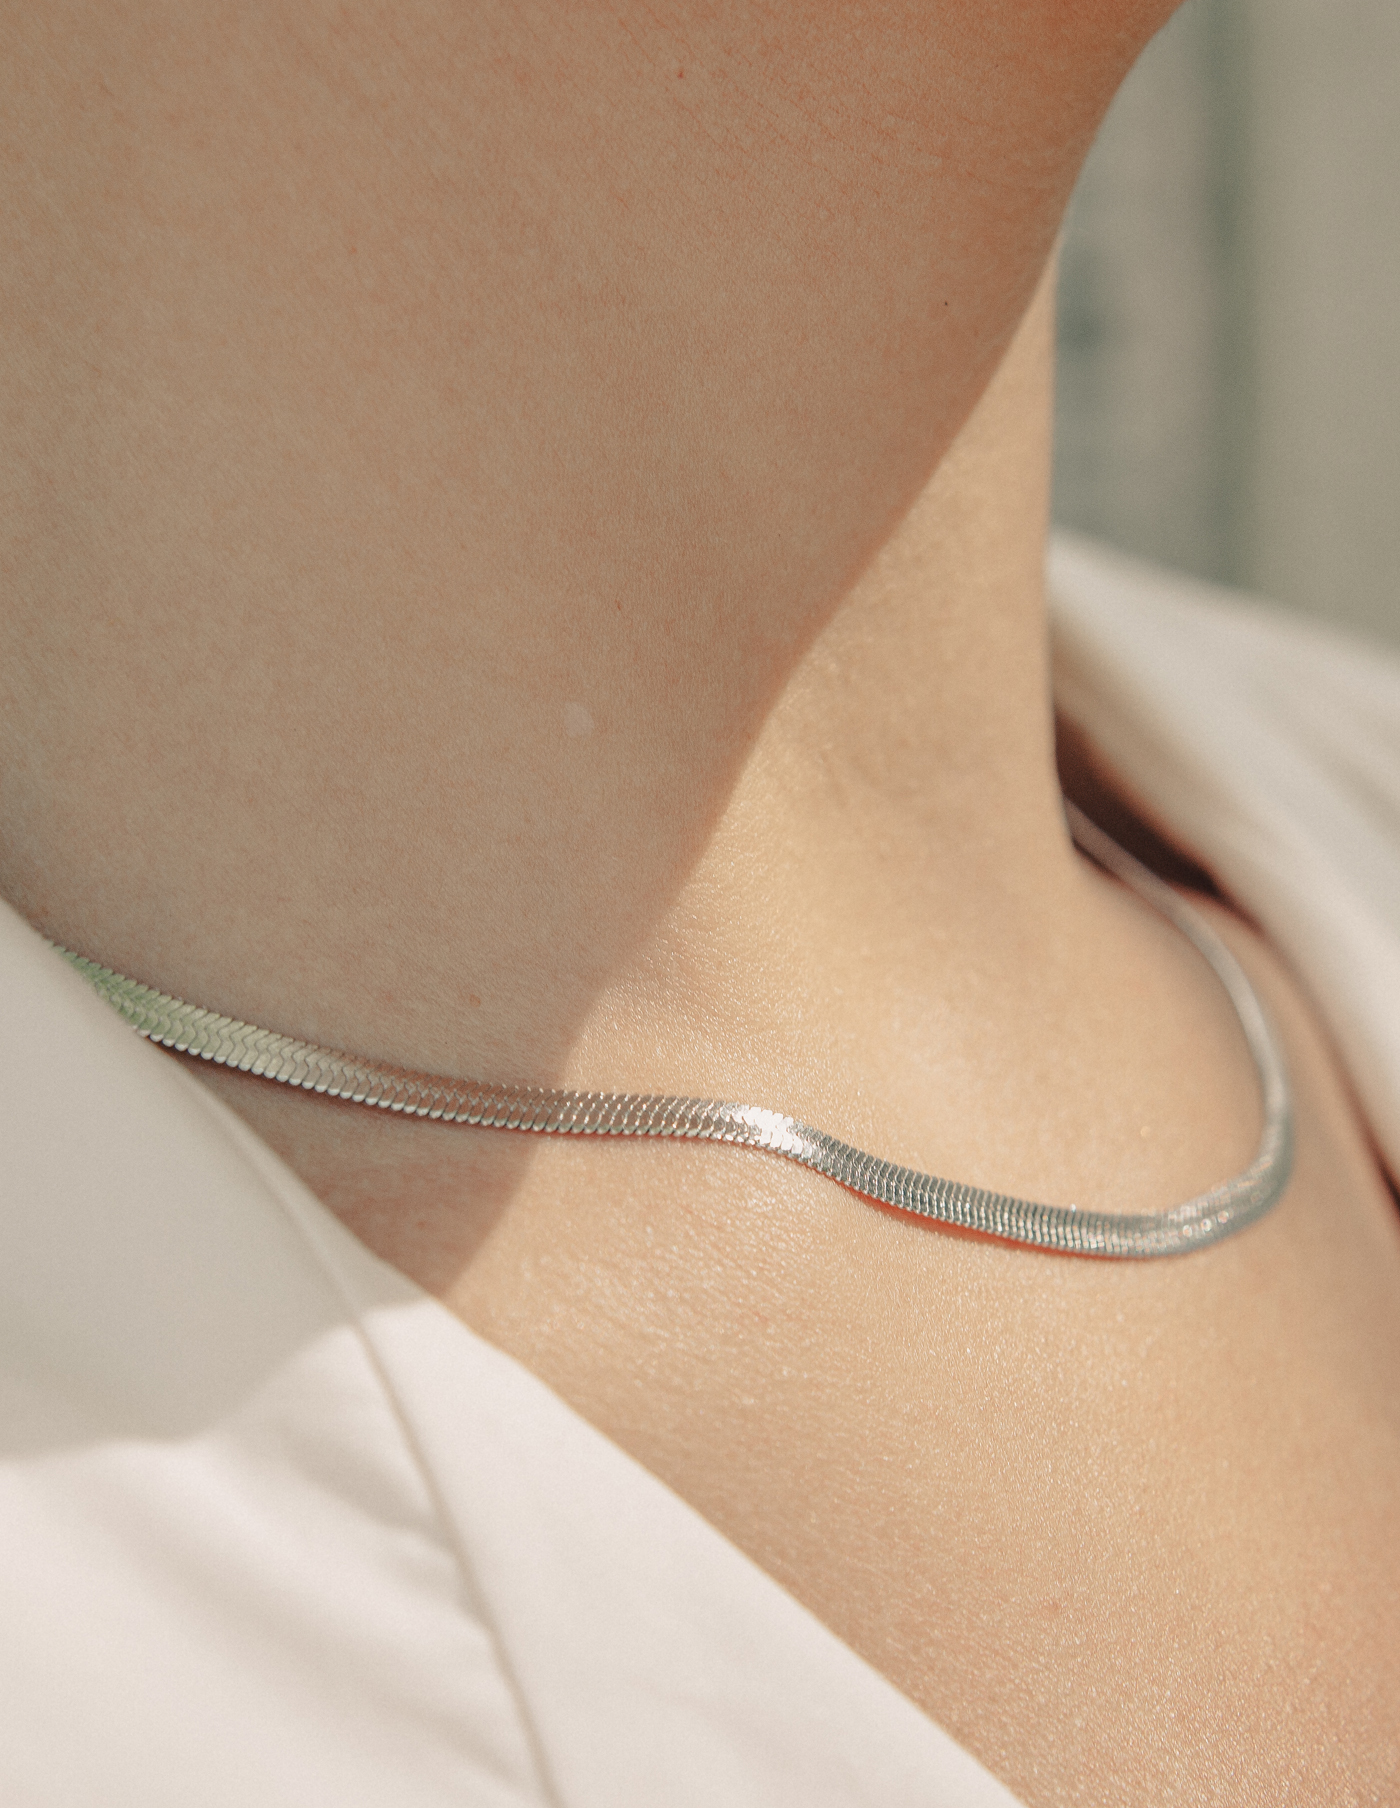 Nordic Muse Silver Snake Chain Choker Necklace, Waterproof